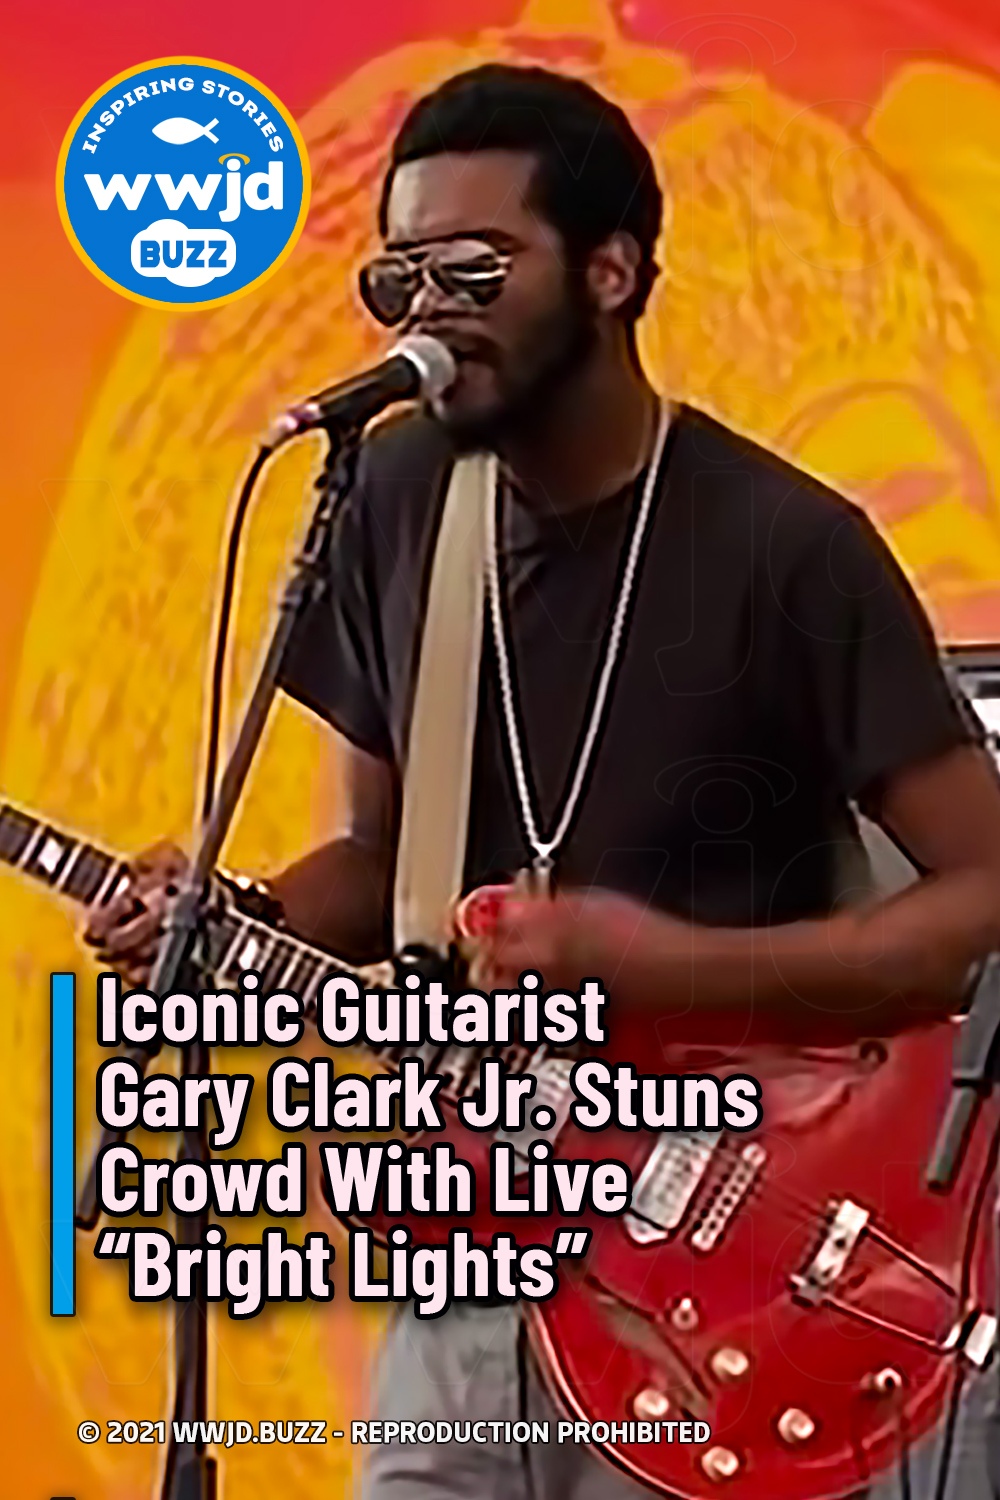 Iconic Guitarist Gary Clark Jr. Stuns Crowd With Live “Bright Lights”